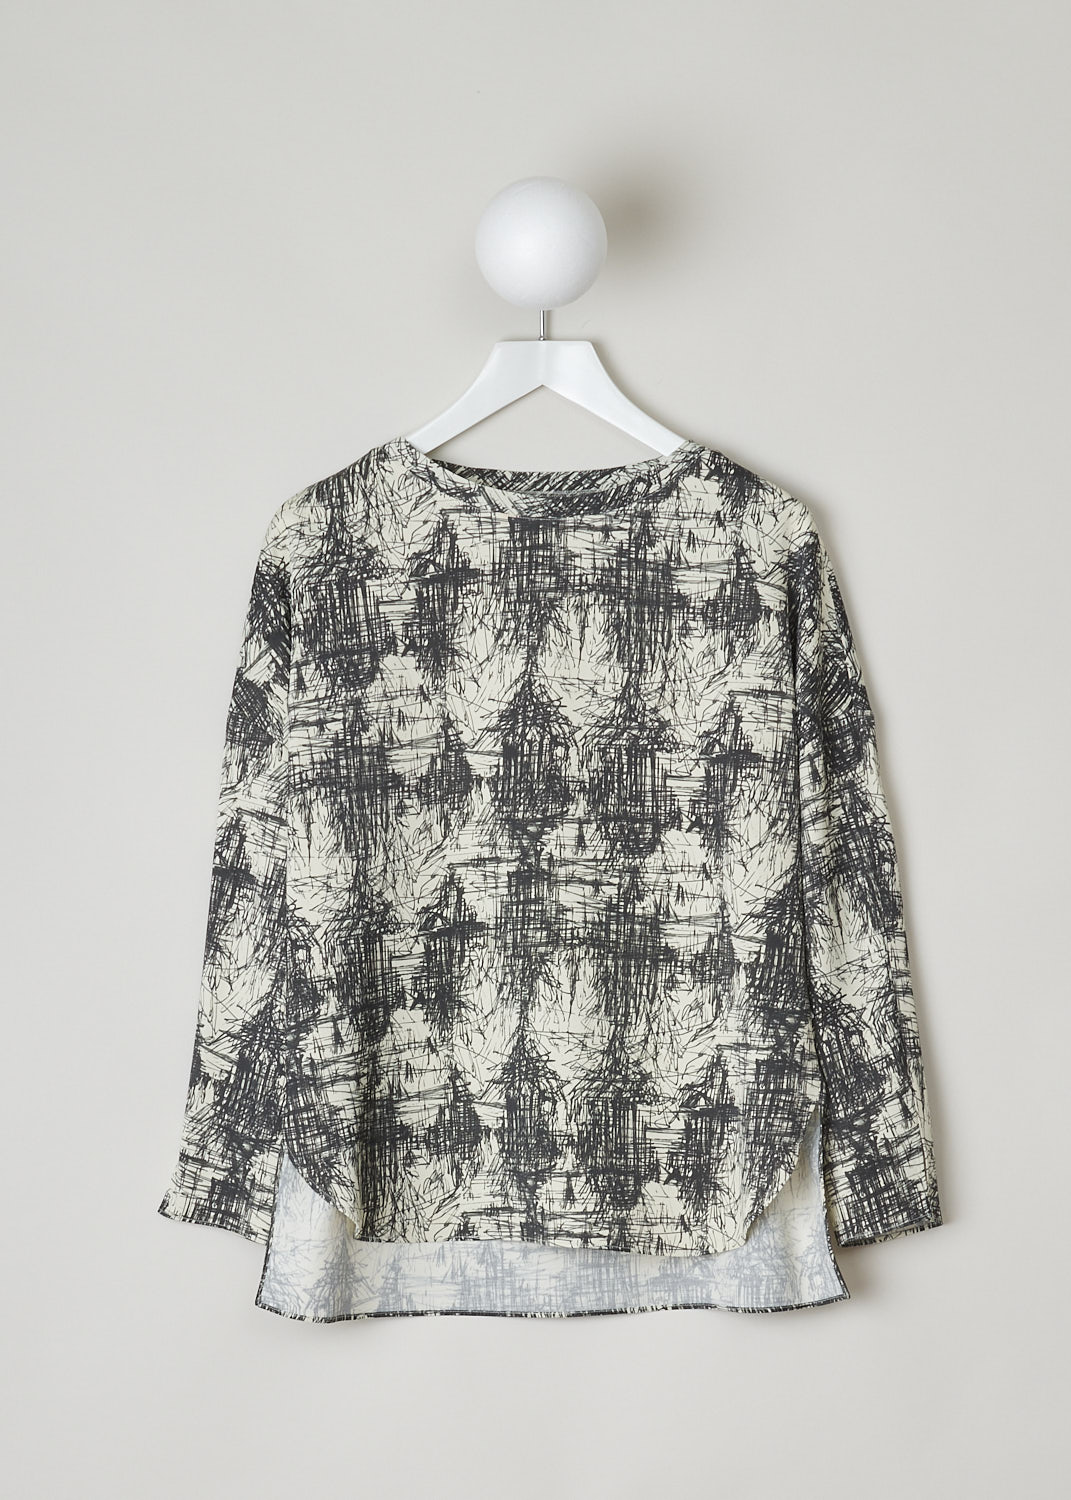 ASPESI, LONG SLEEVE SCRIBBLE PRINT TOP, 5619_V128_60042, Print, Black, White, Front, This top has an off-white base with a black scribble print allover. The top features a round neckline and long sleeves with small slits. In the front, the top has a rounded hemline with side slits. In the back, the hemline is straight. This model has an asymmetric finish, meaning the back is longer than the front.
